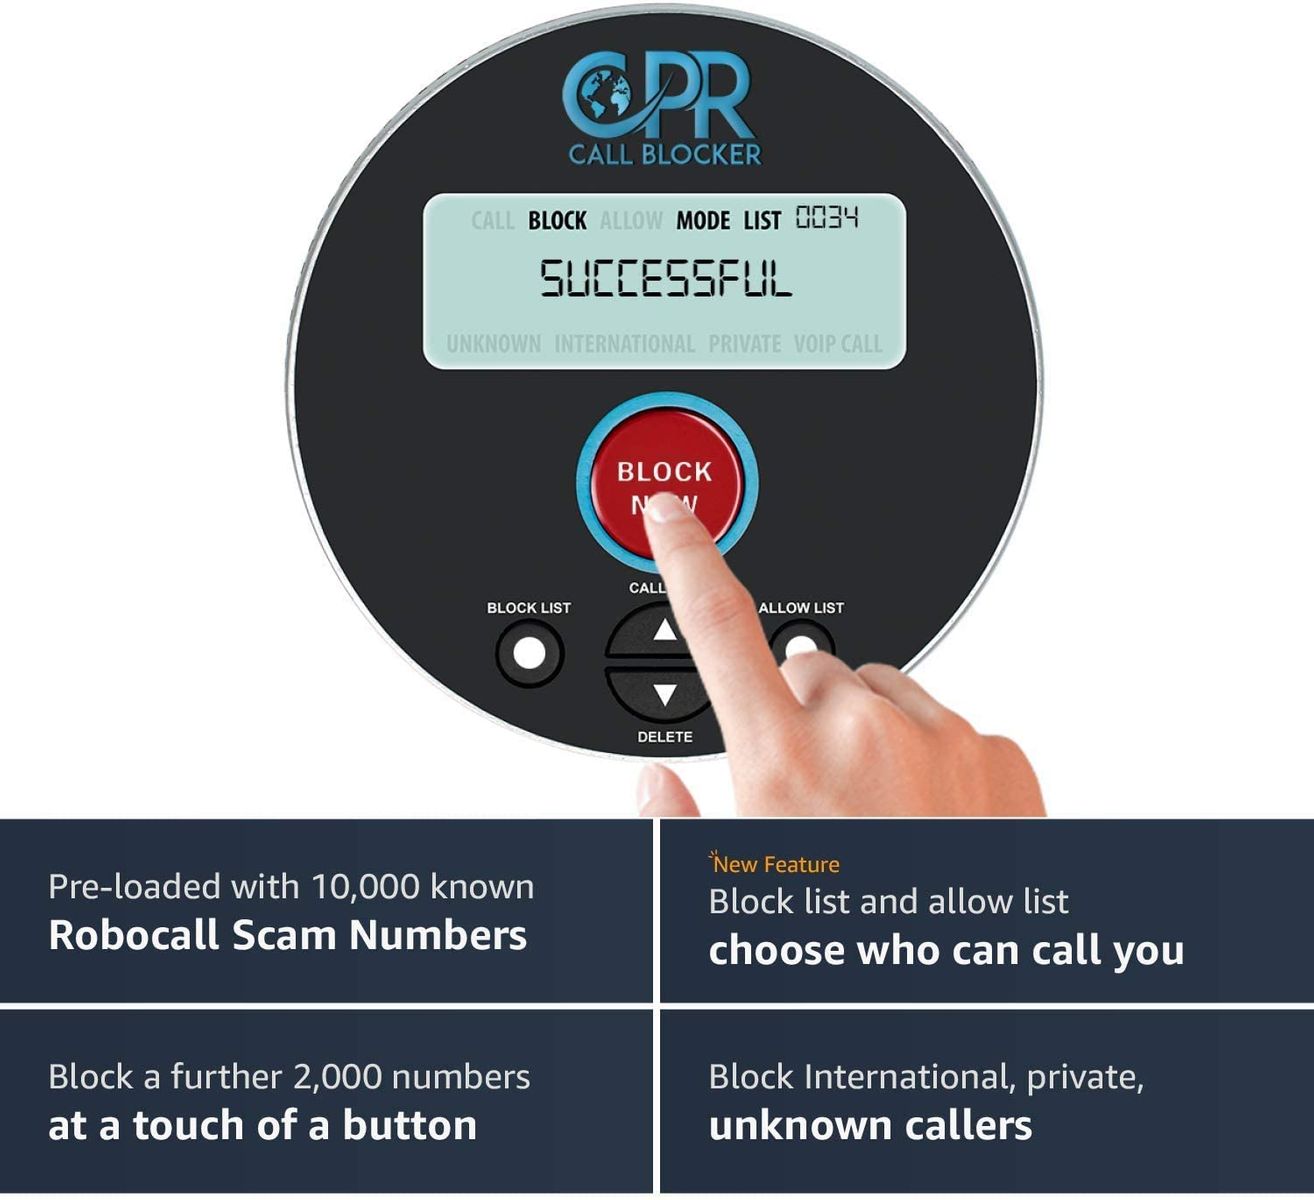 CPR Call Blocker V10000 - Block all nuisance, PPI calls, scams, calls and unwanted calls to landlines